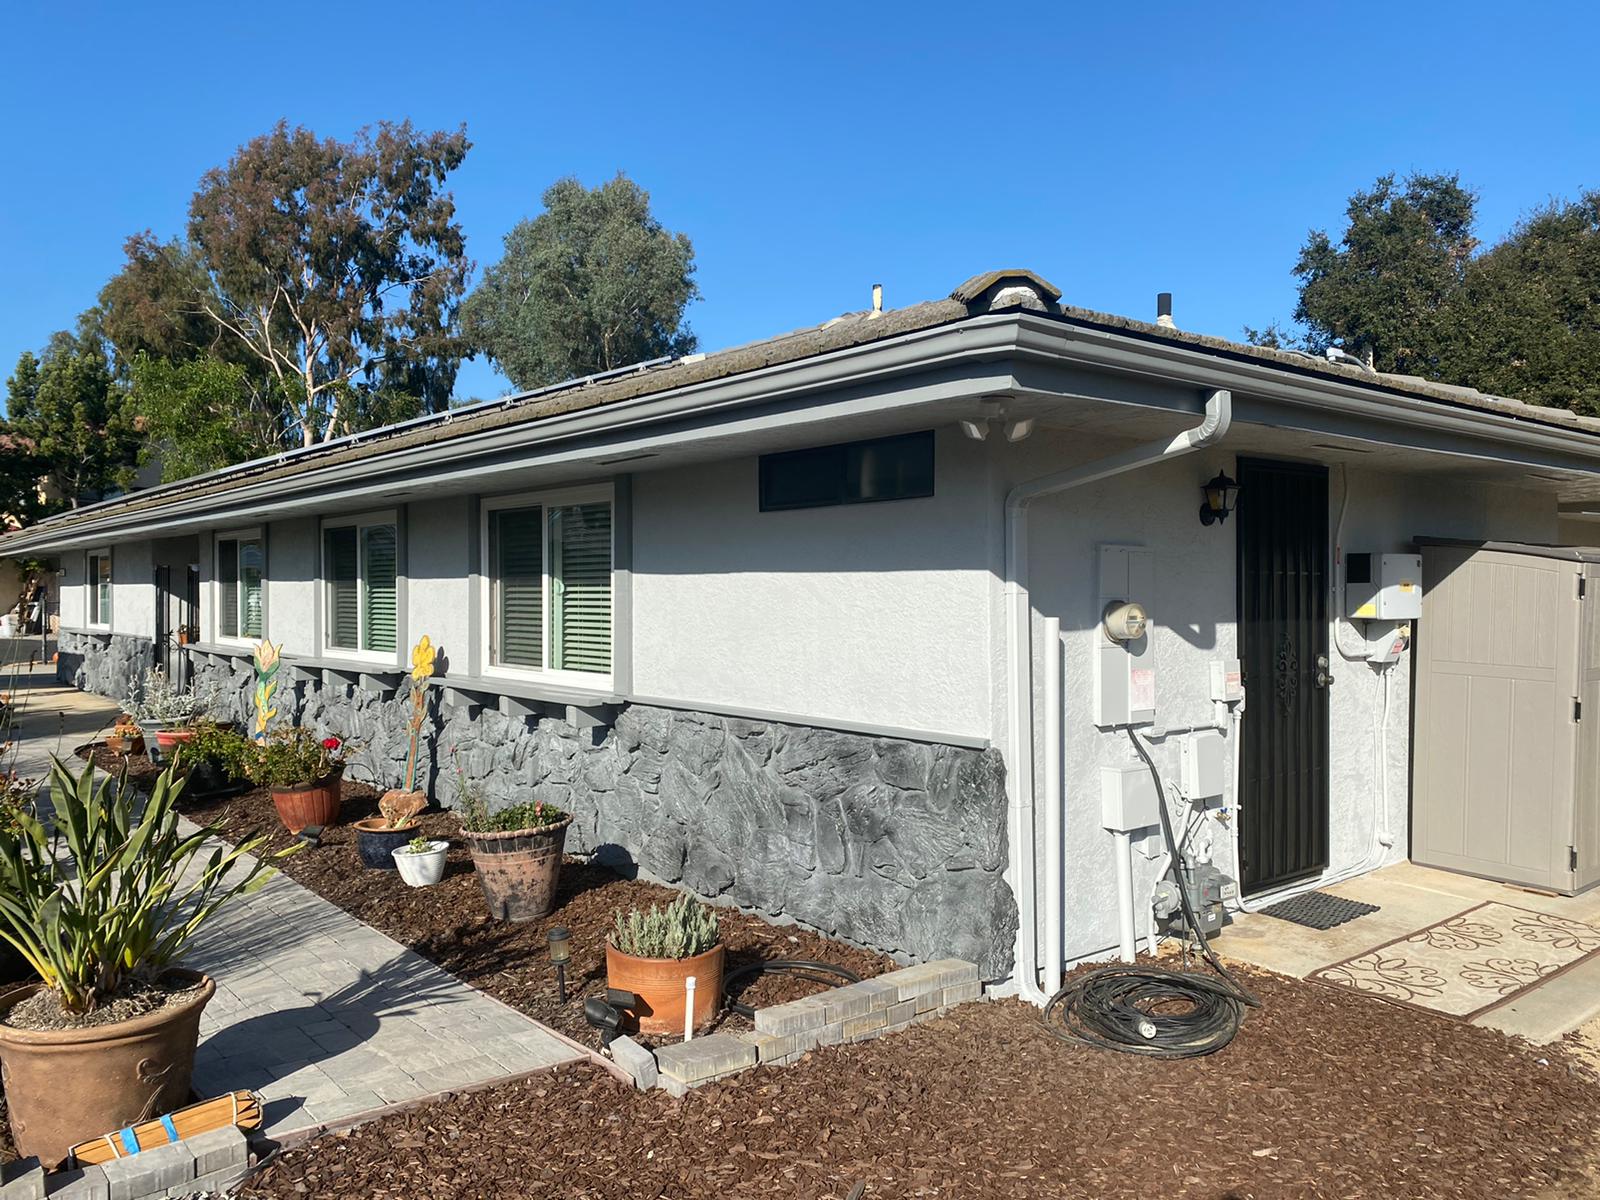 House Painting in San Diego (3)